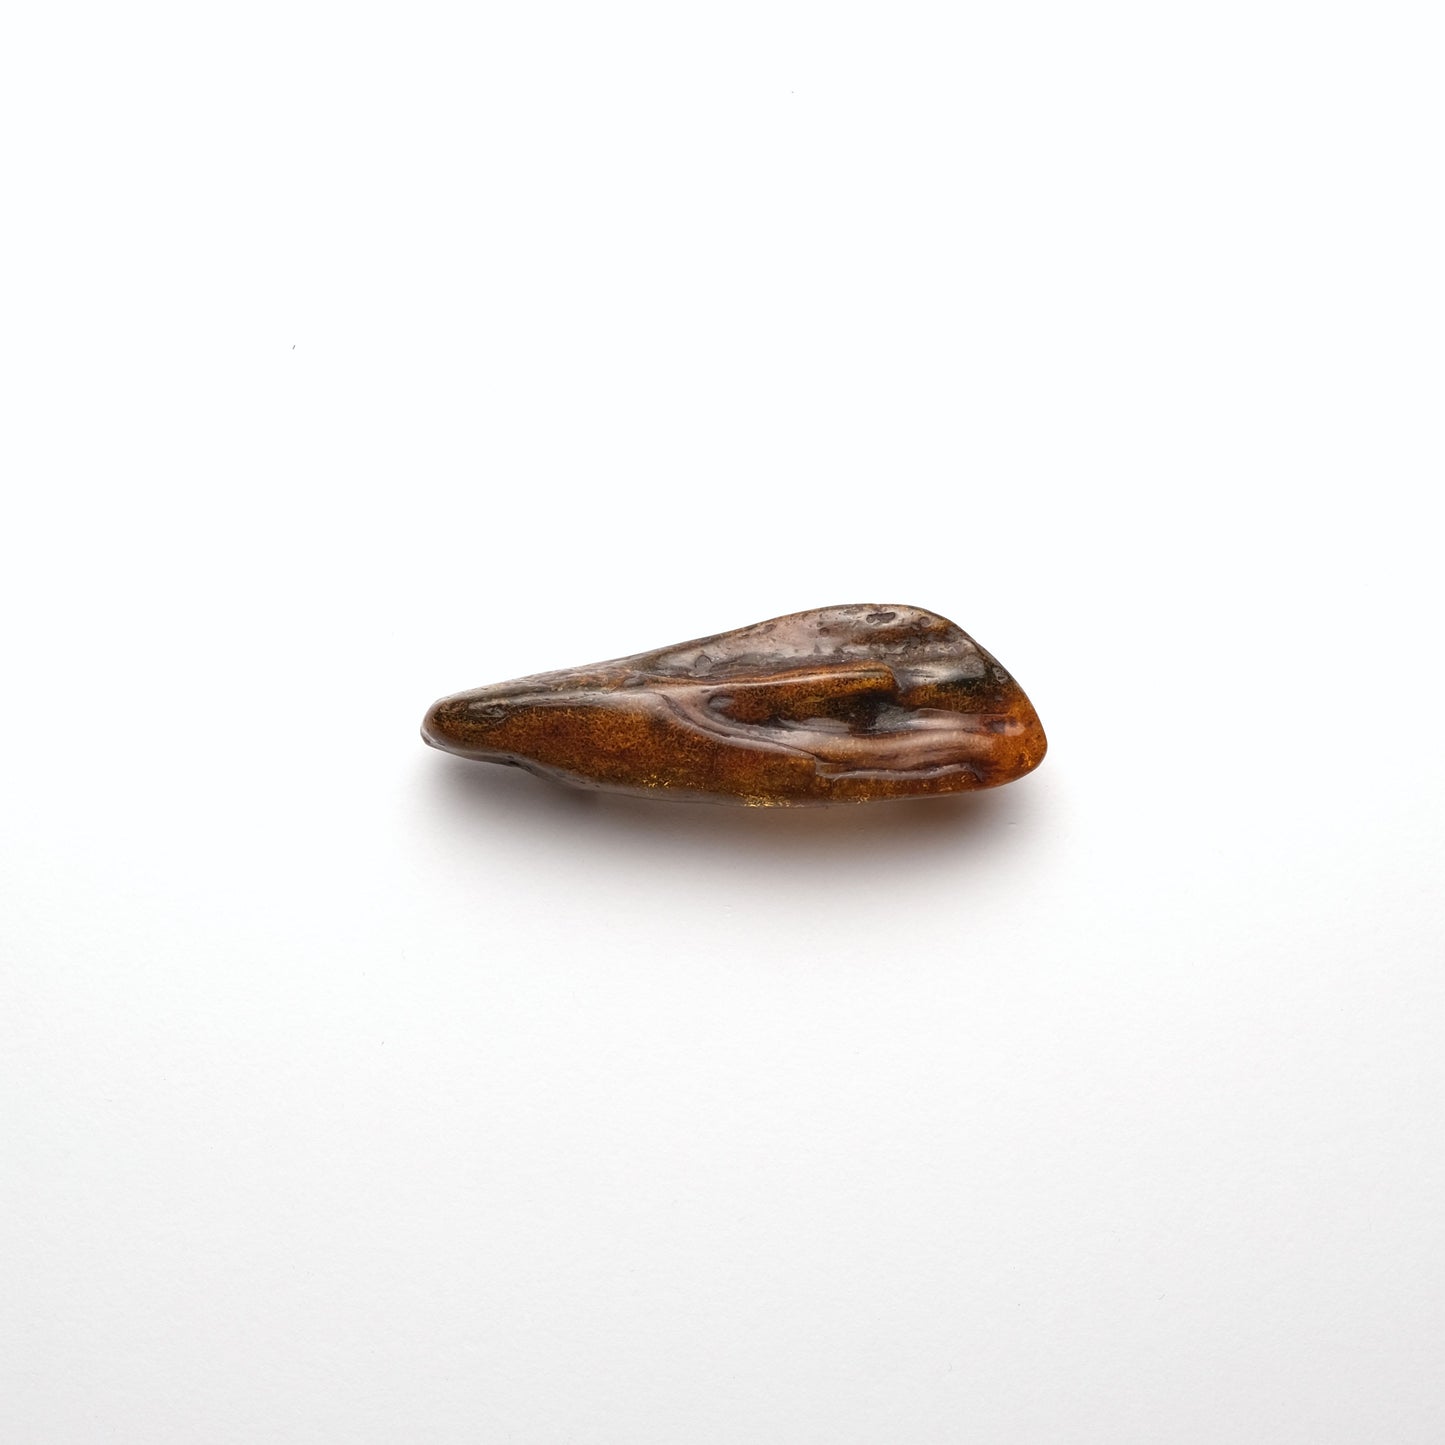 Hair clip in amber